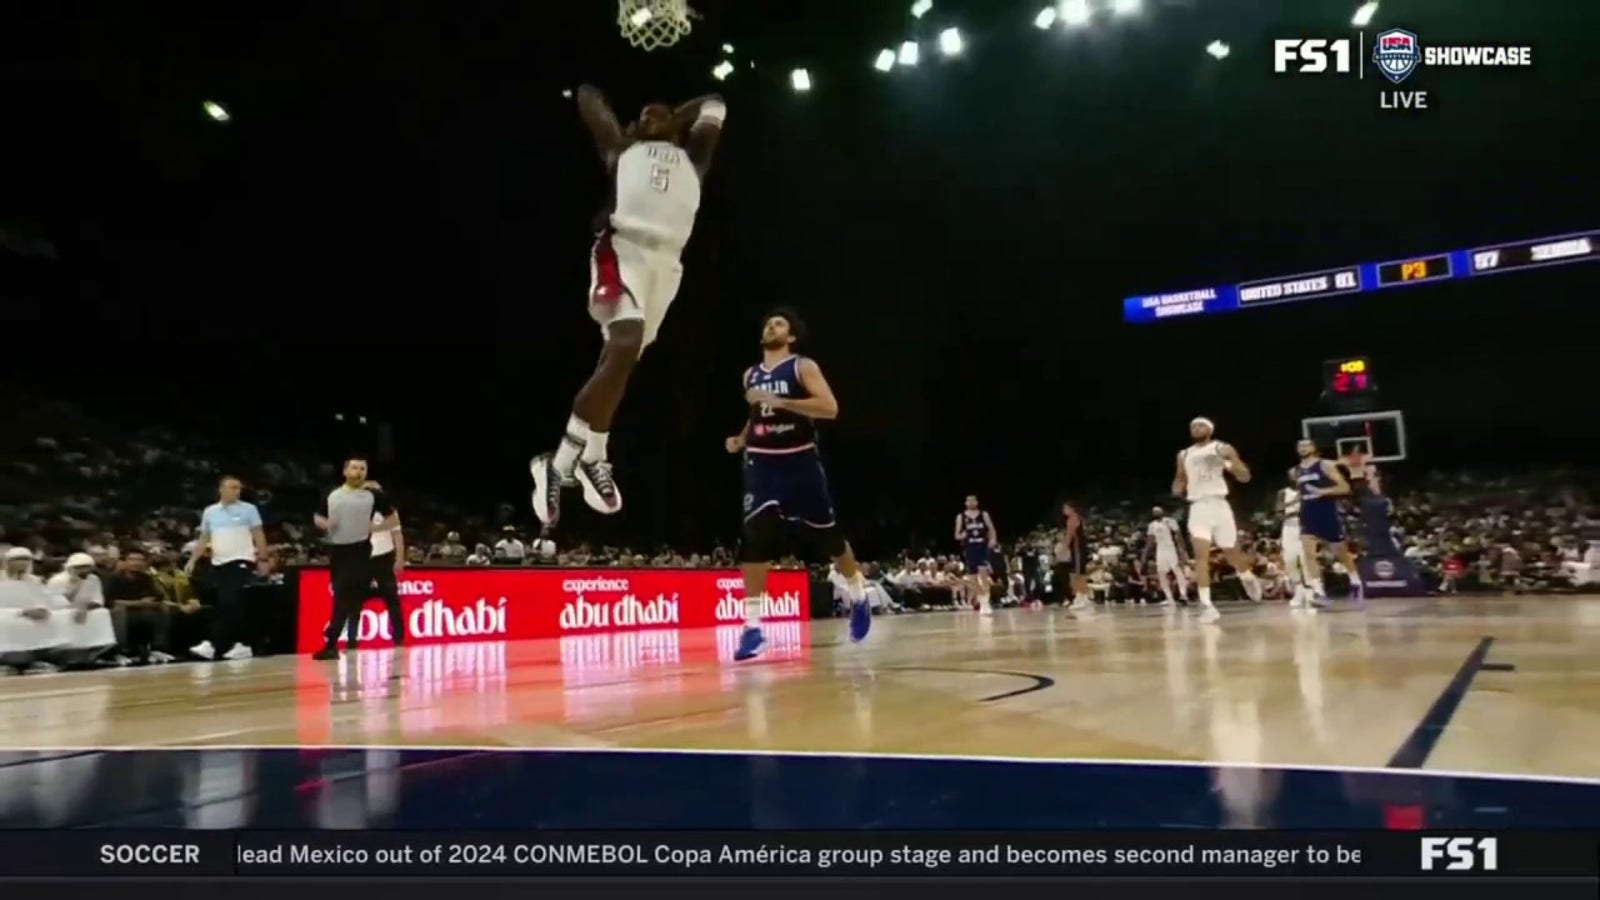 United States' Anthony Edwards comes away with a steal and finishes with a dunk vs. Serbia